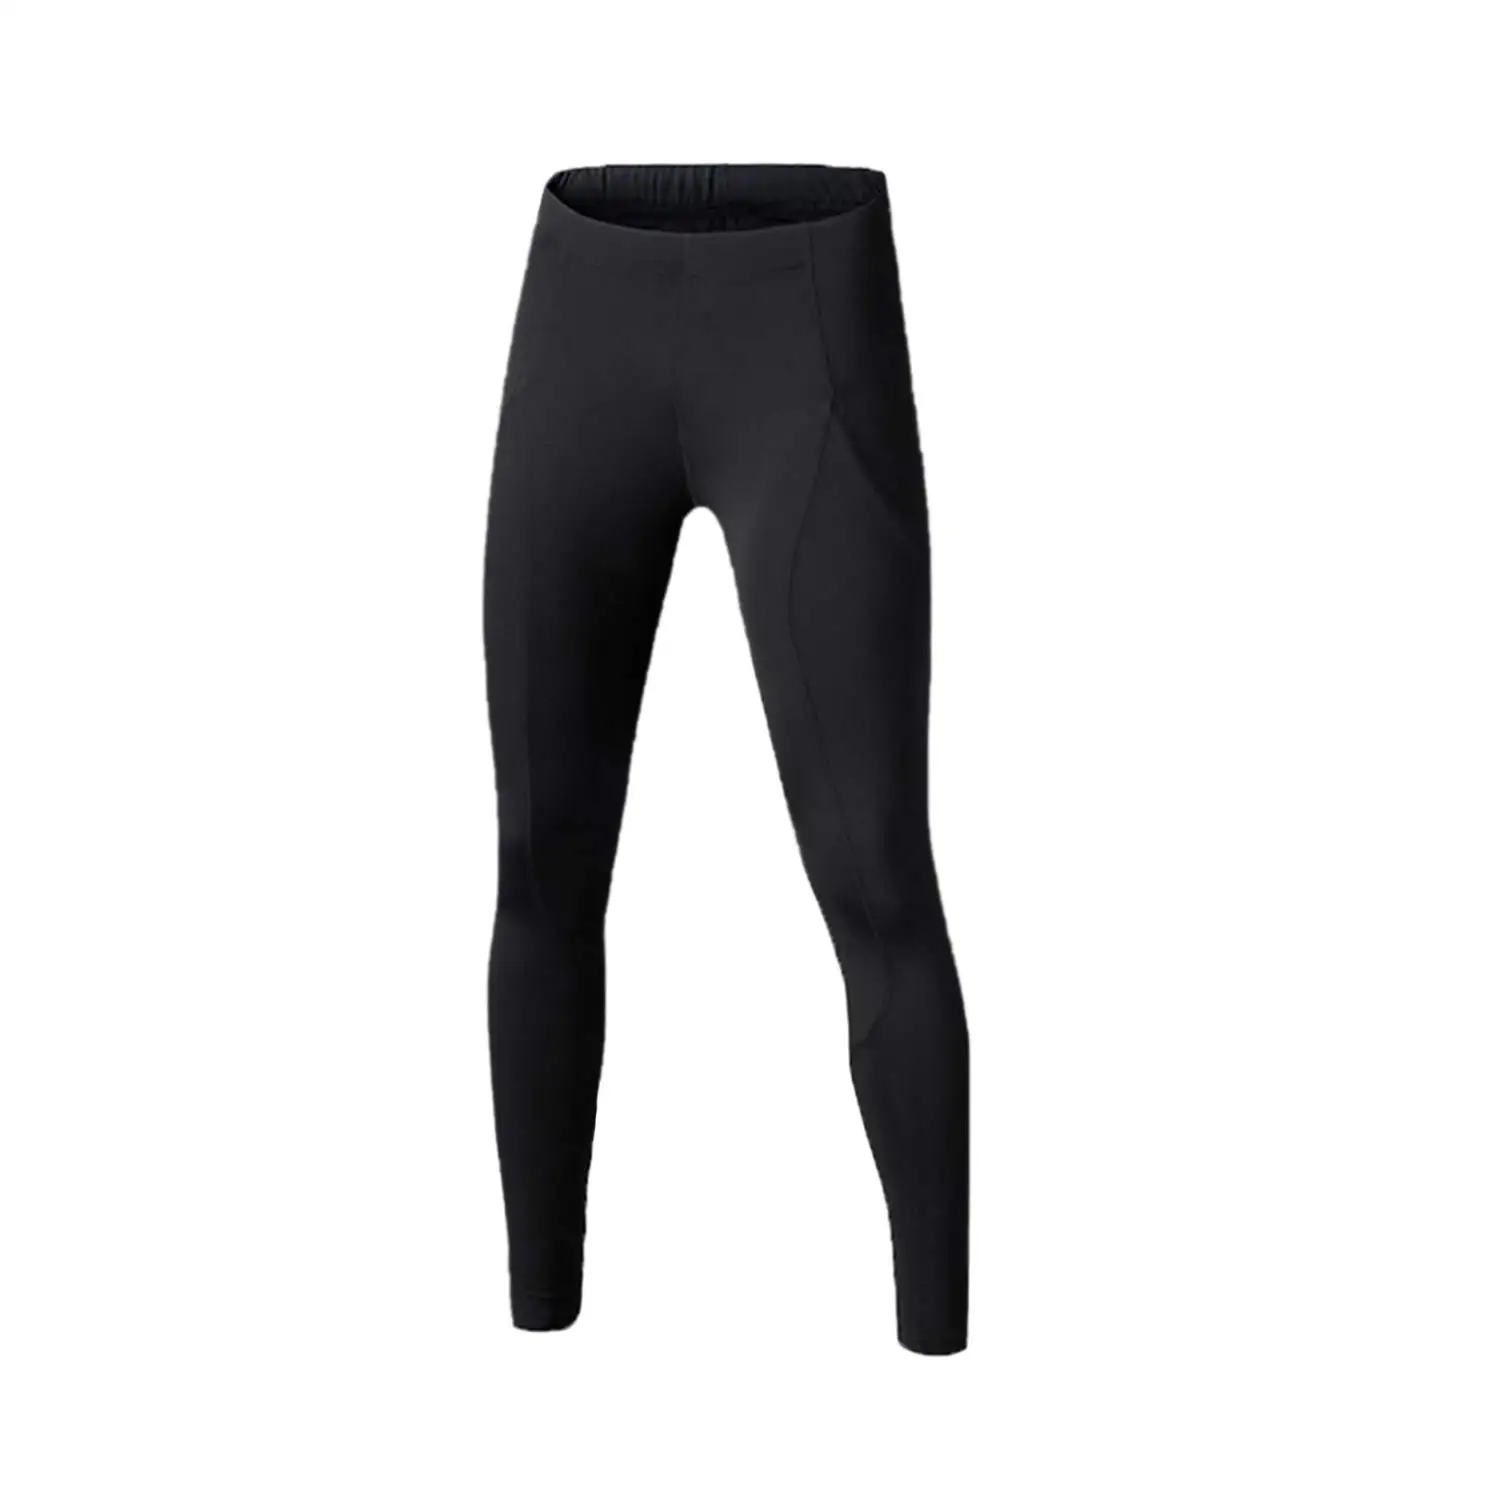 LEAO Youth Boys Compression Leggings Quick Dry Performance Ahtletic Tights Basketball Footabll Baseball Baselayers 